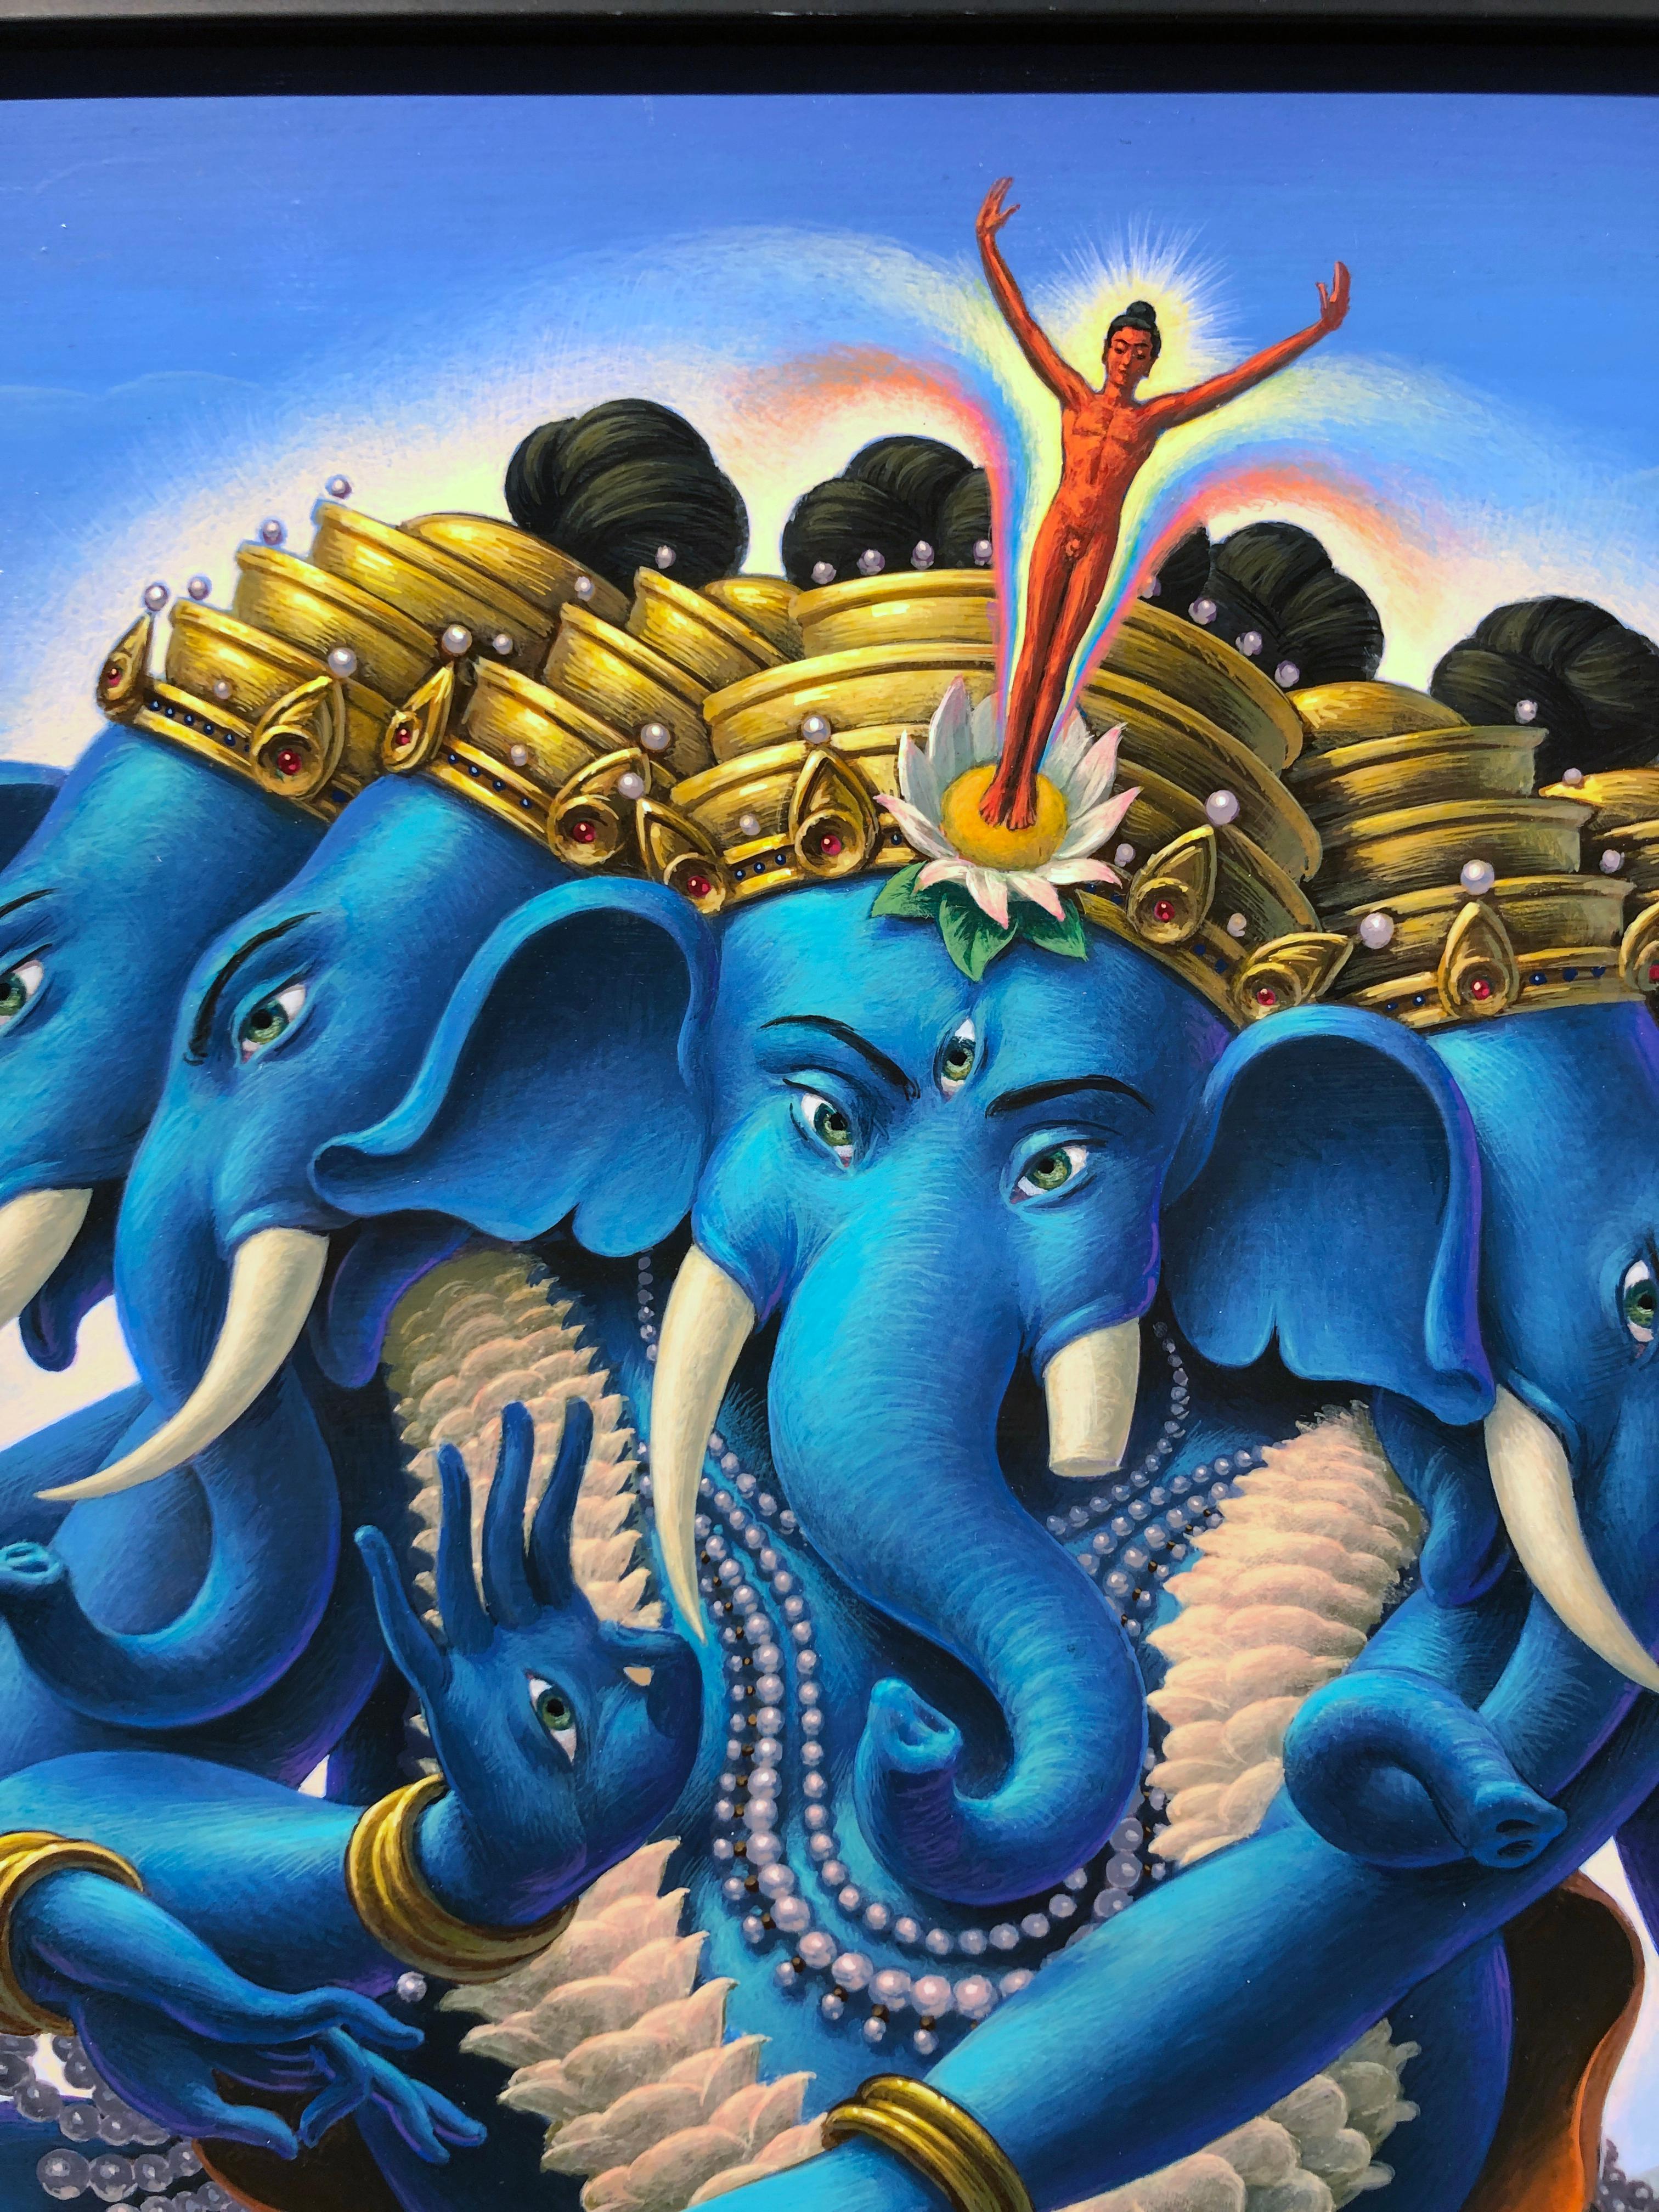 Ganesh at the Maelstrom - Highly Detailed Surreal, Symbolic Painting 5